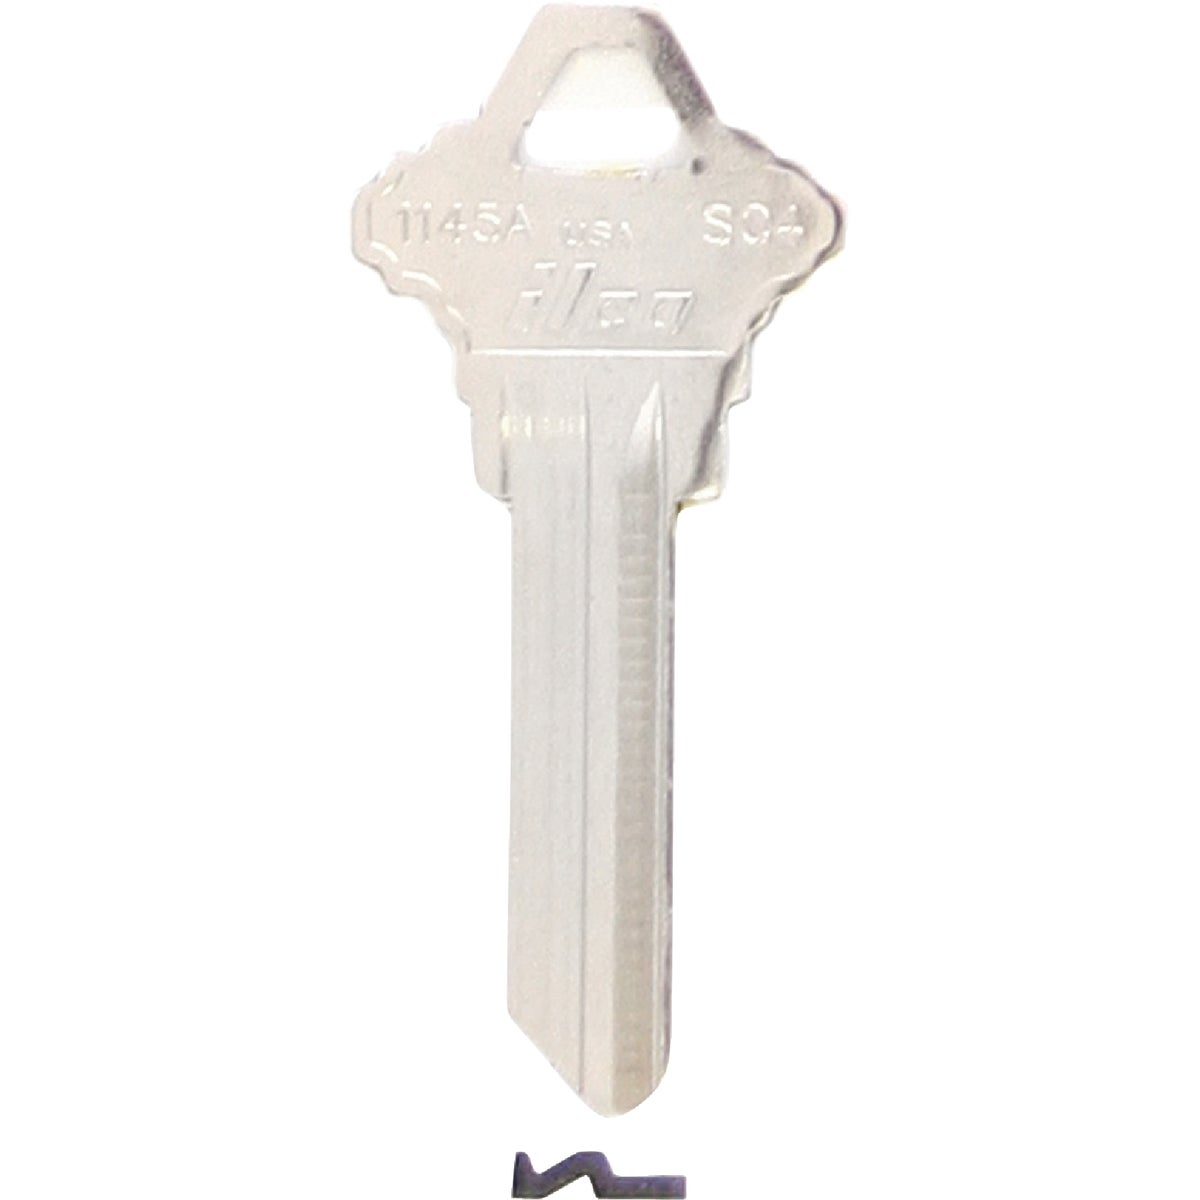 UPC 036448100996 product image for Schlage Lock Key Blank, Pack of 10 | upcitemdb.com